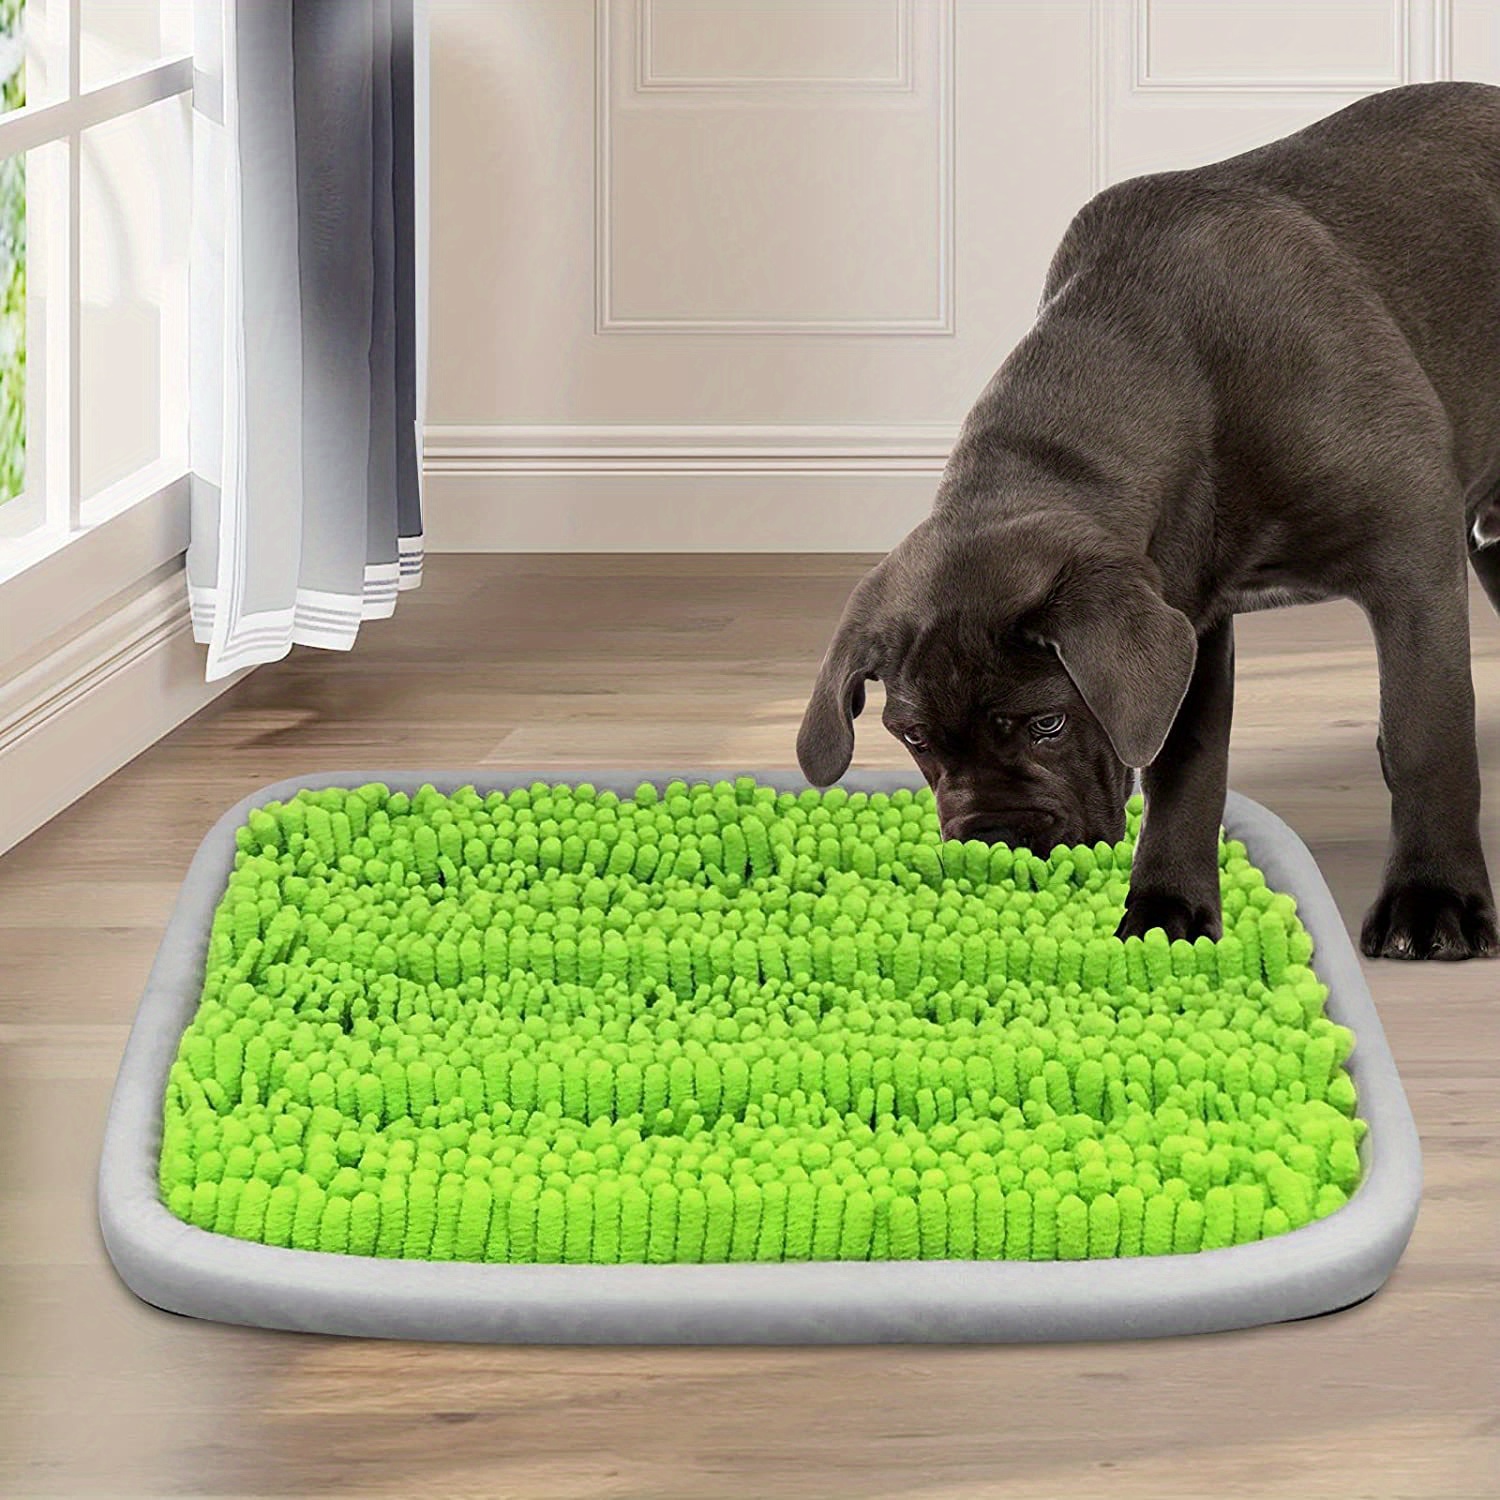 train your dog easily with this anti choking square pet dog sniffing pad